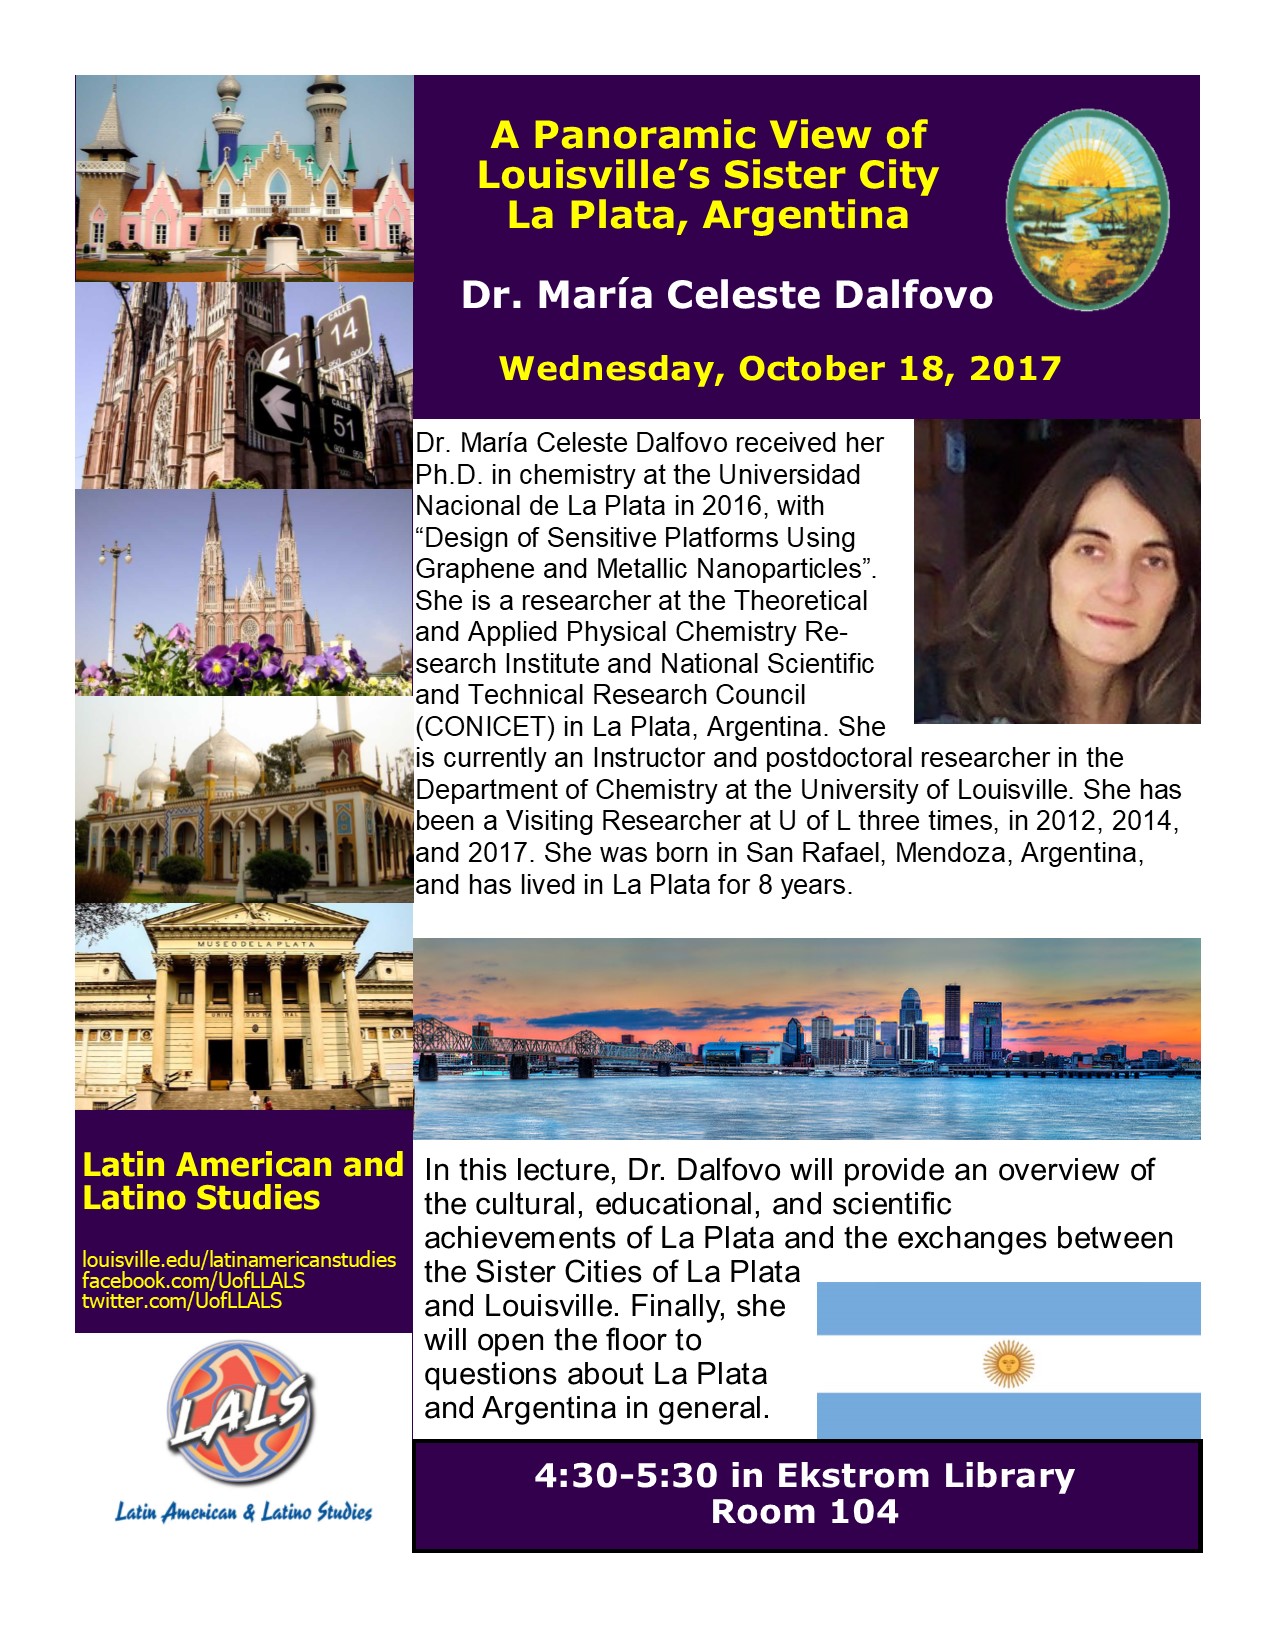 Louisville's Sister City La Plata, Argentina: A Panoramic View of its History, Artistic and Scientific Contributions, and Cultural and Educational Exchanges